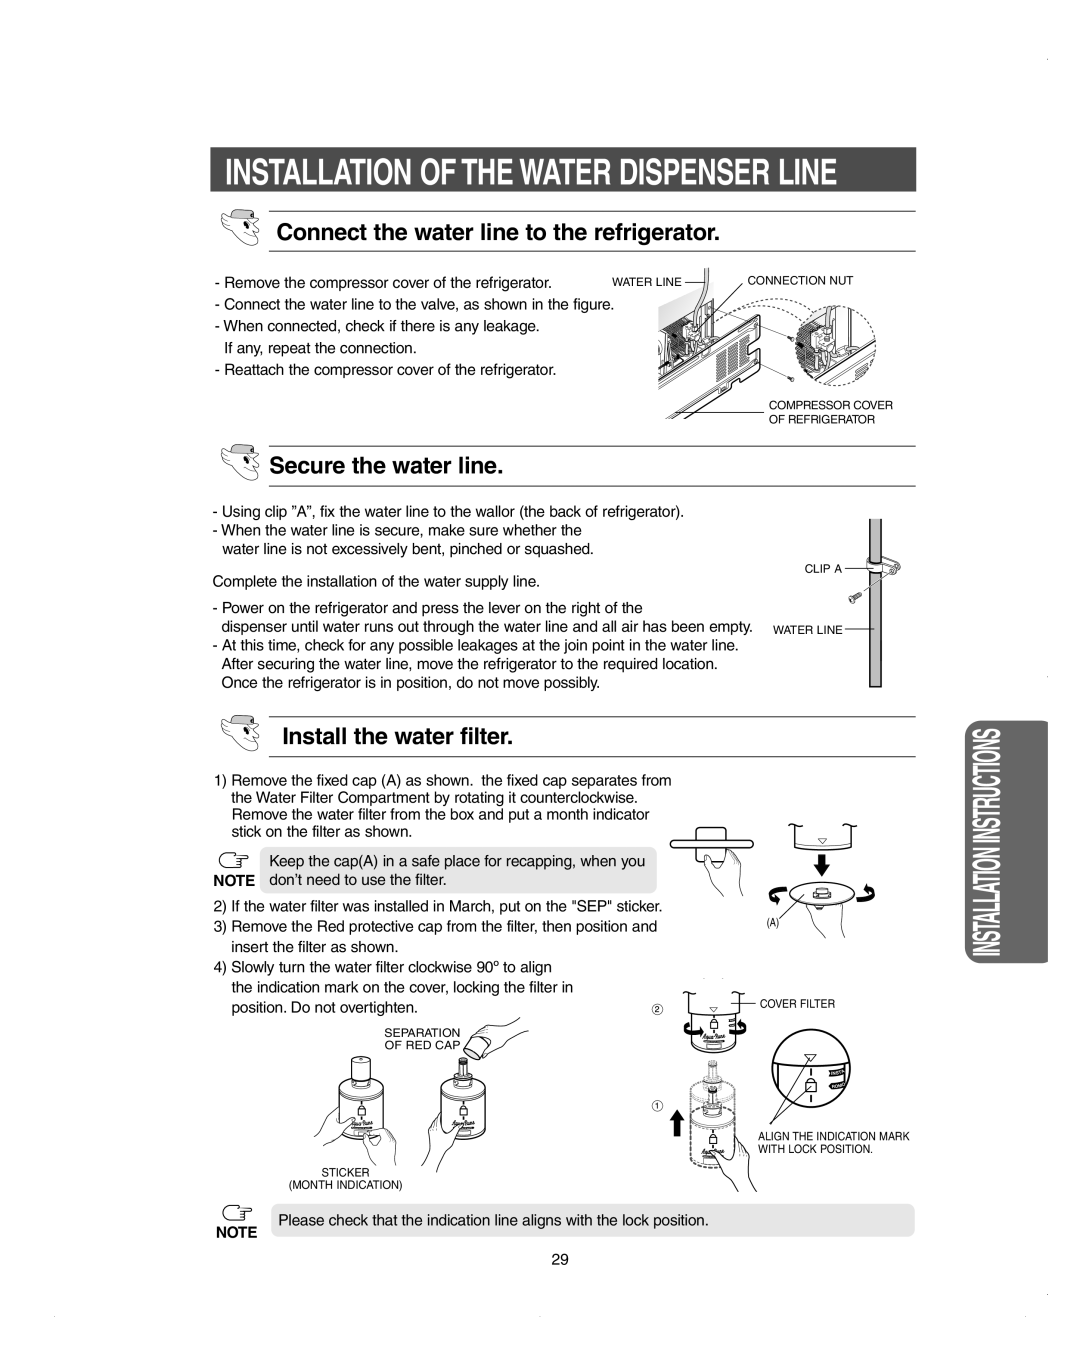 Samsung DA99-01278C owner manual Installation Of The Water Dispenser Line, Secure the water line, Install the water filter 